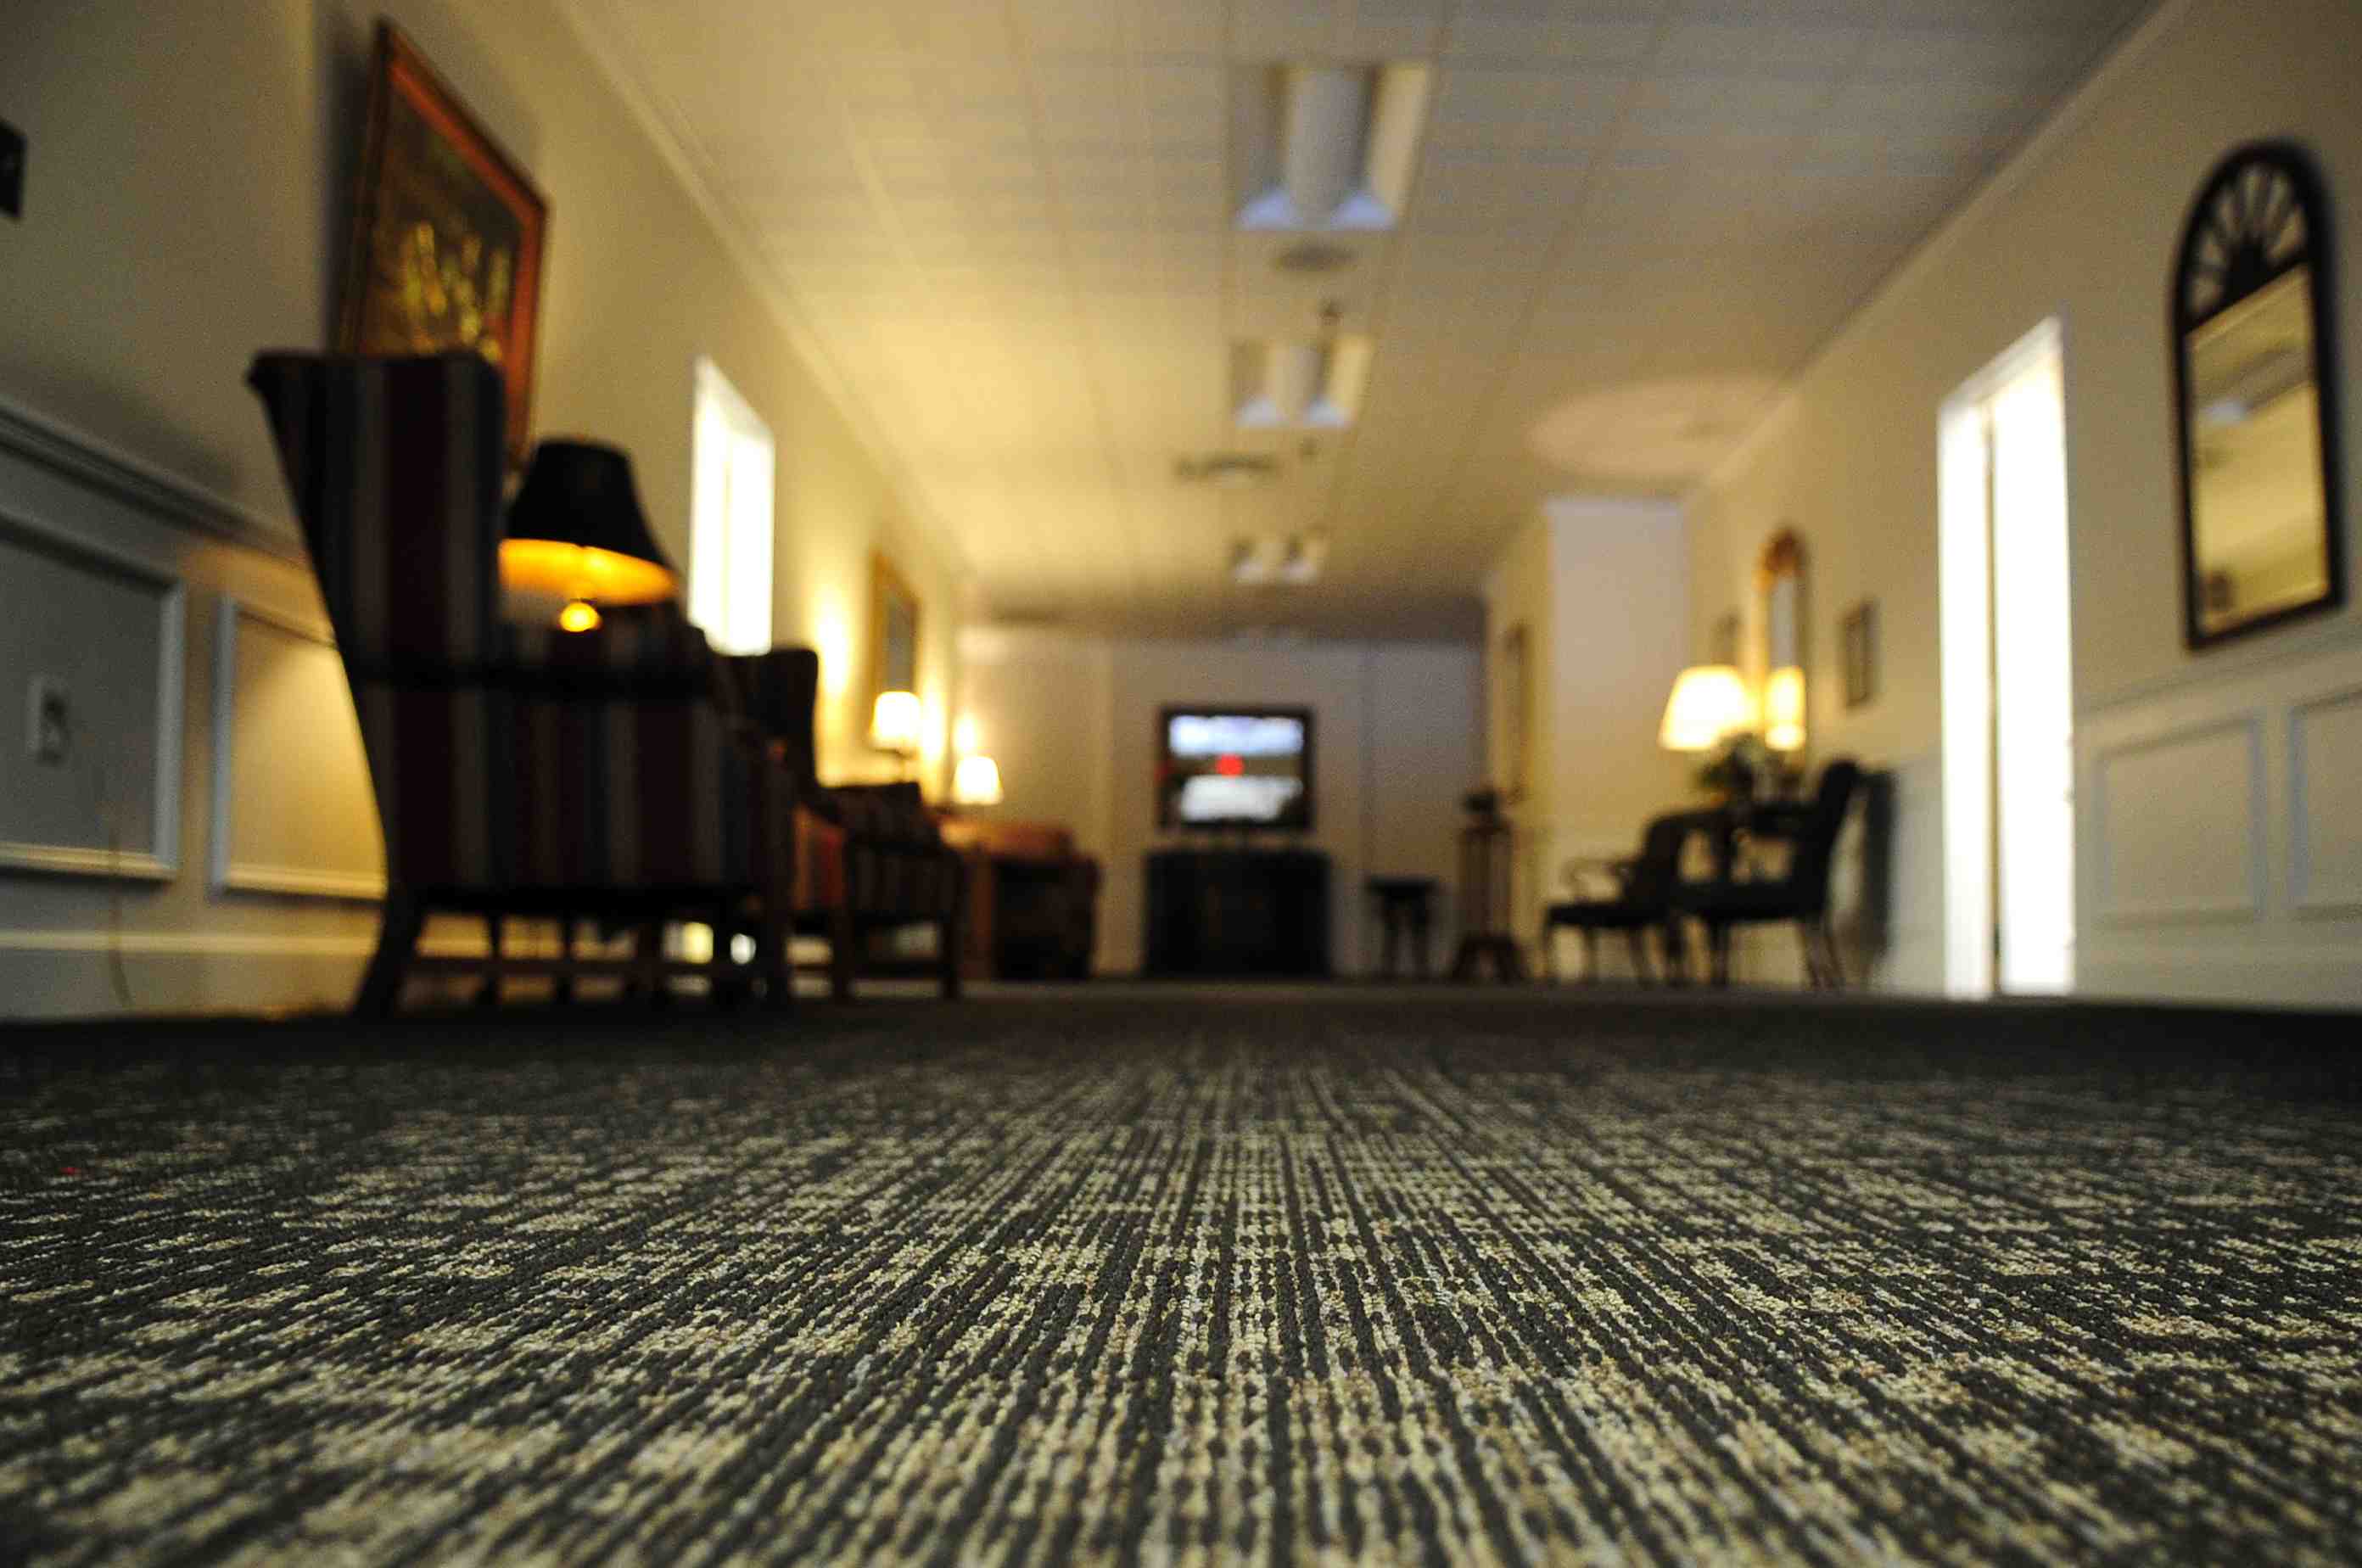 commercial janitorial services - Steam Extraction Carpet Cleaning Service